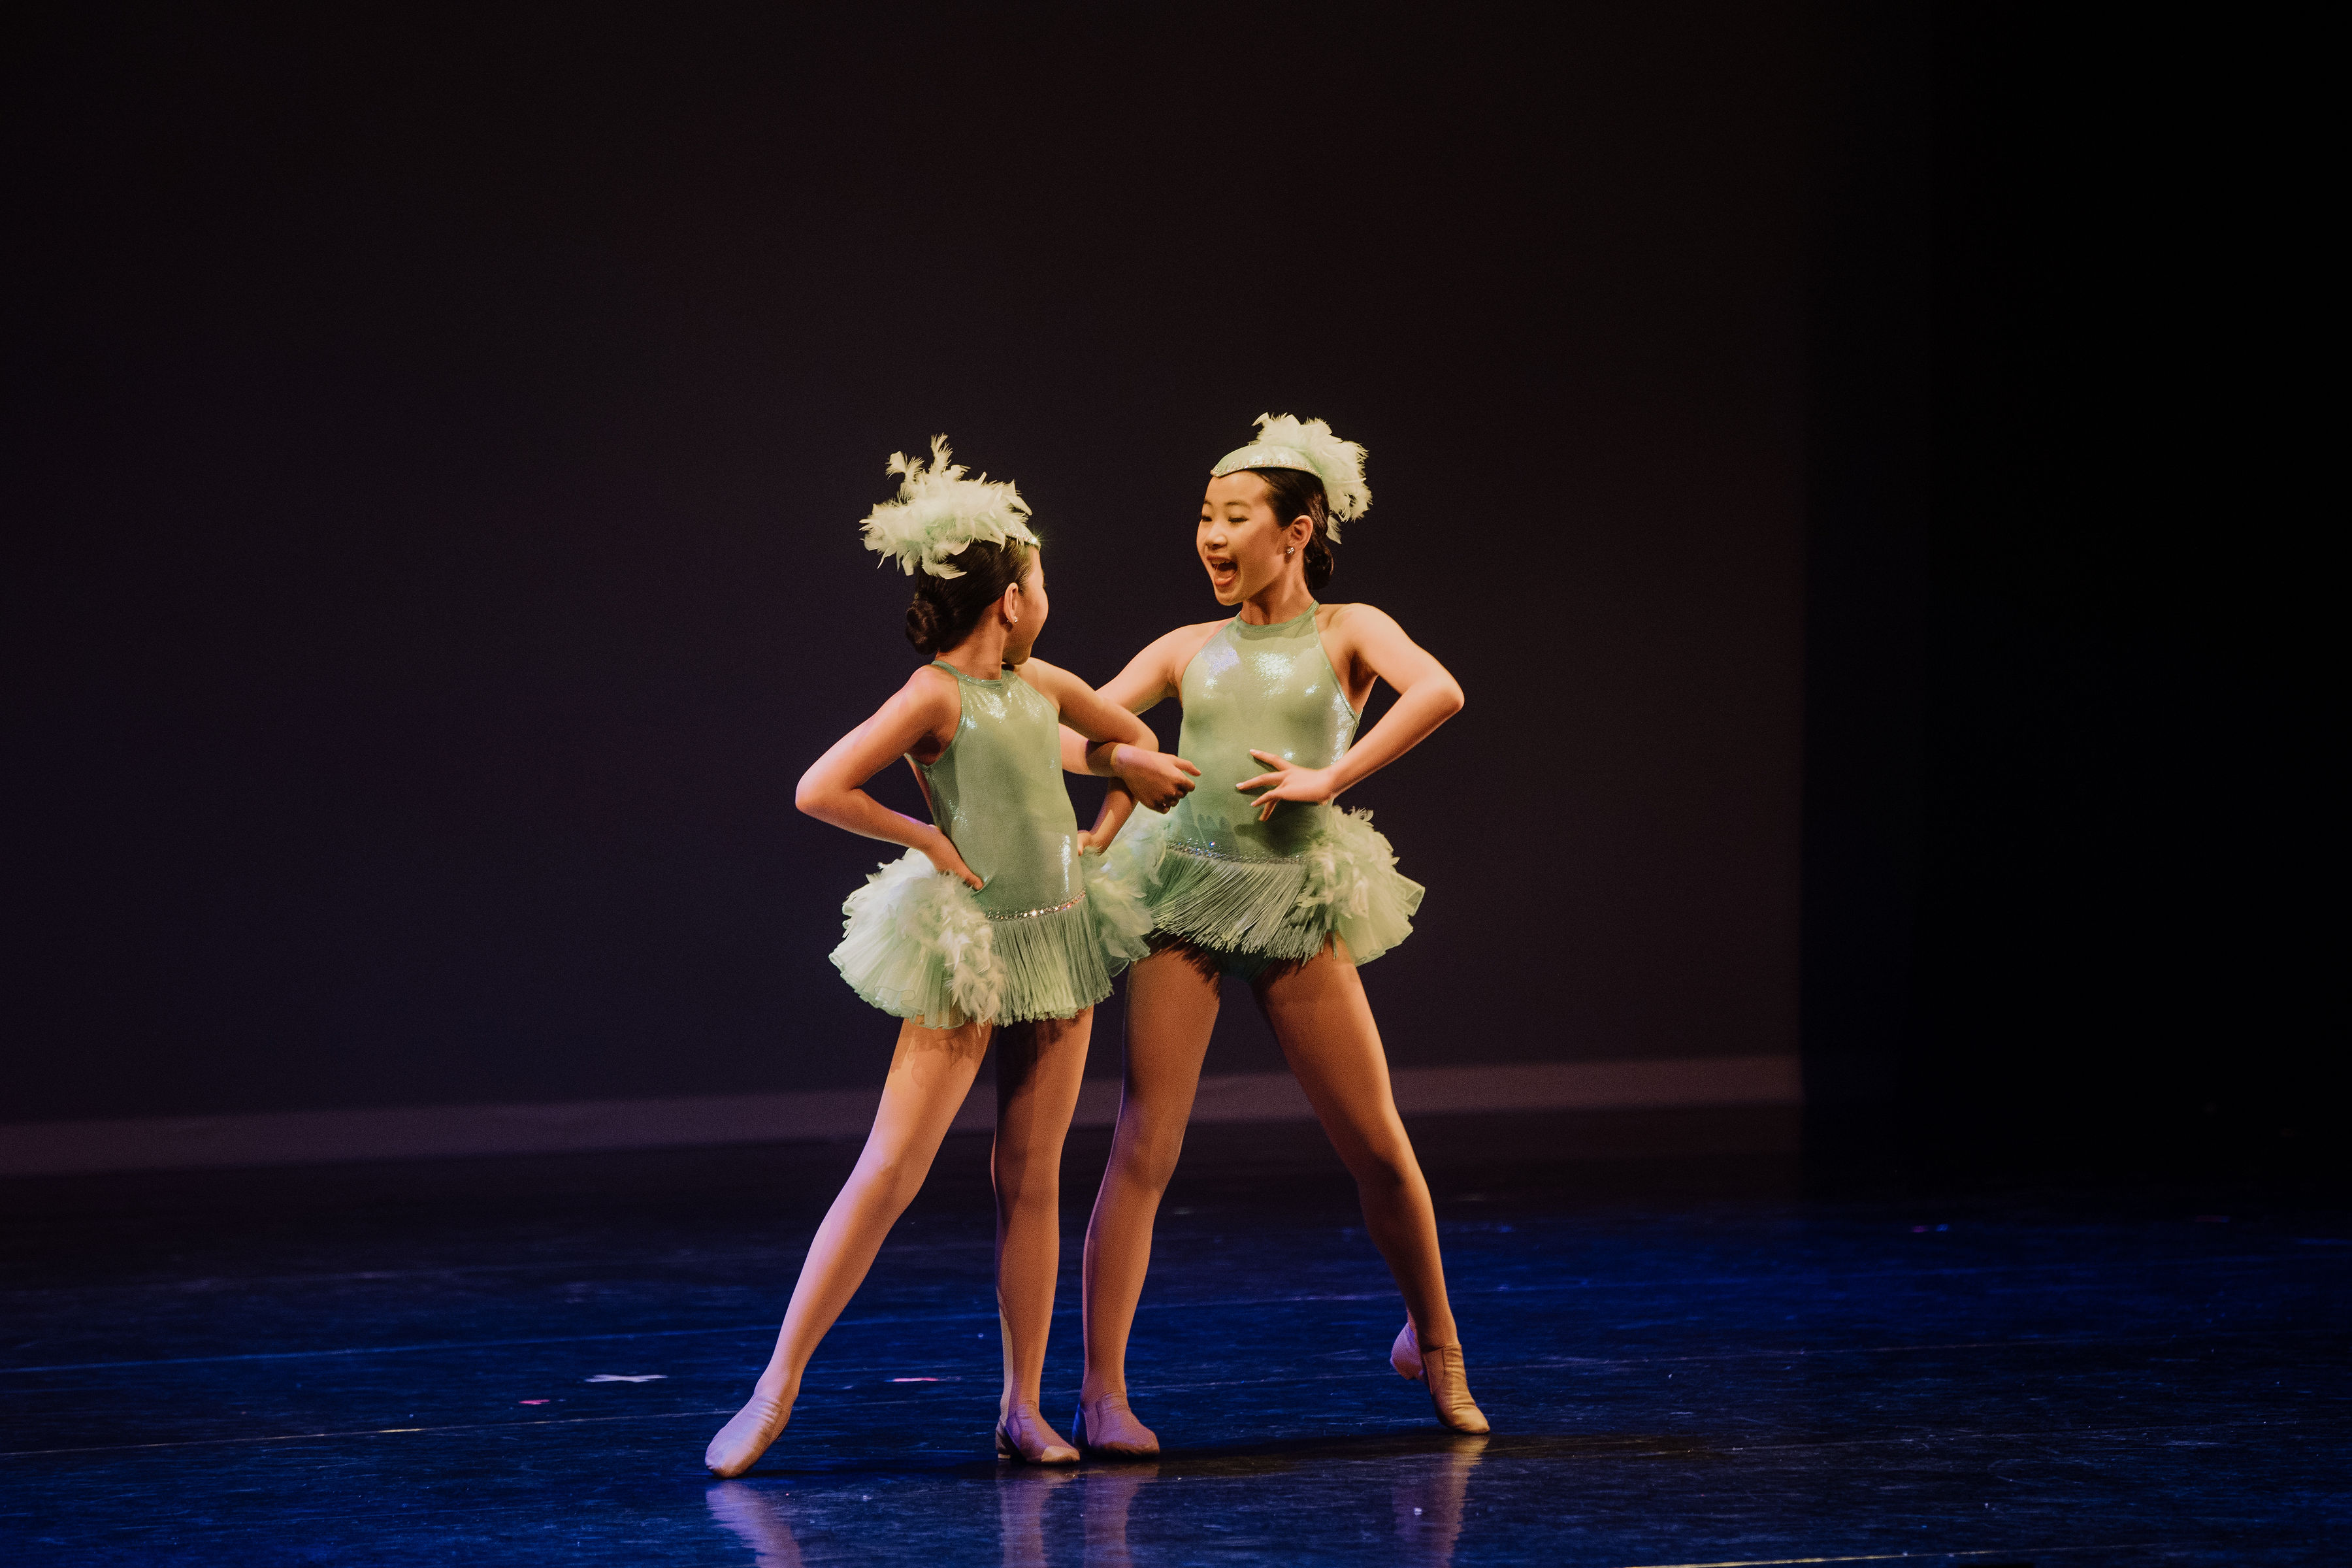 Two jazz dancers smiling at each other on stage